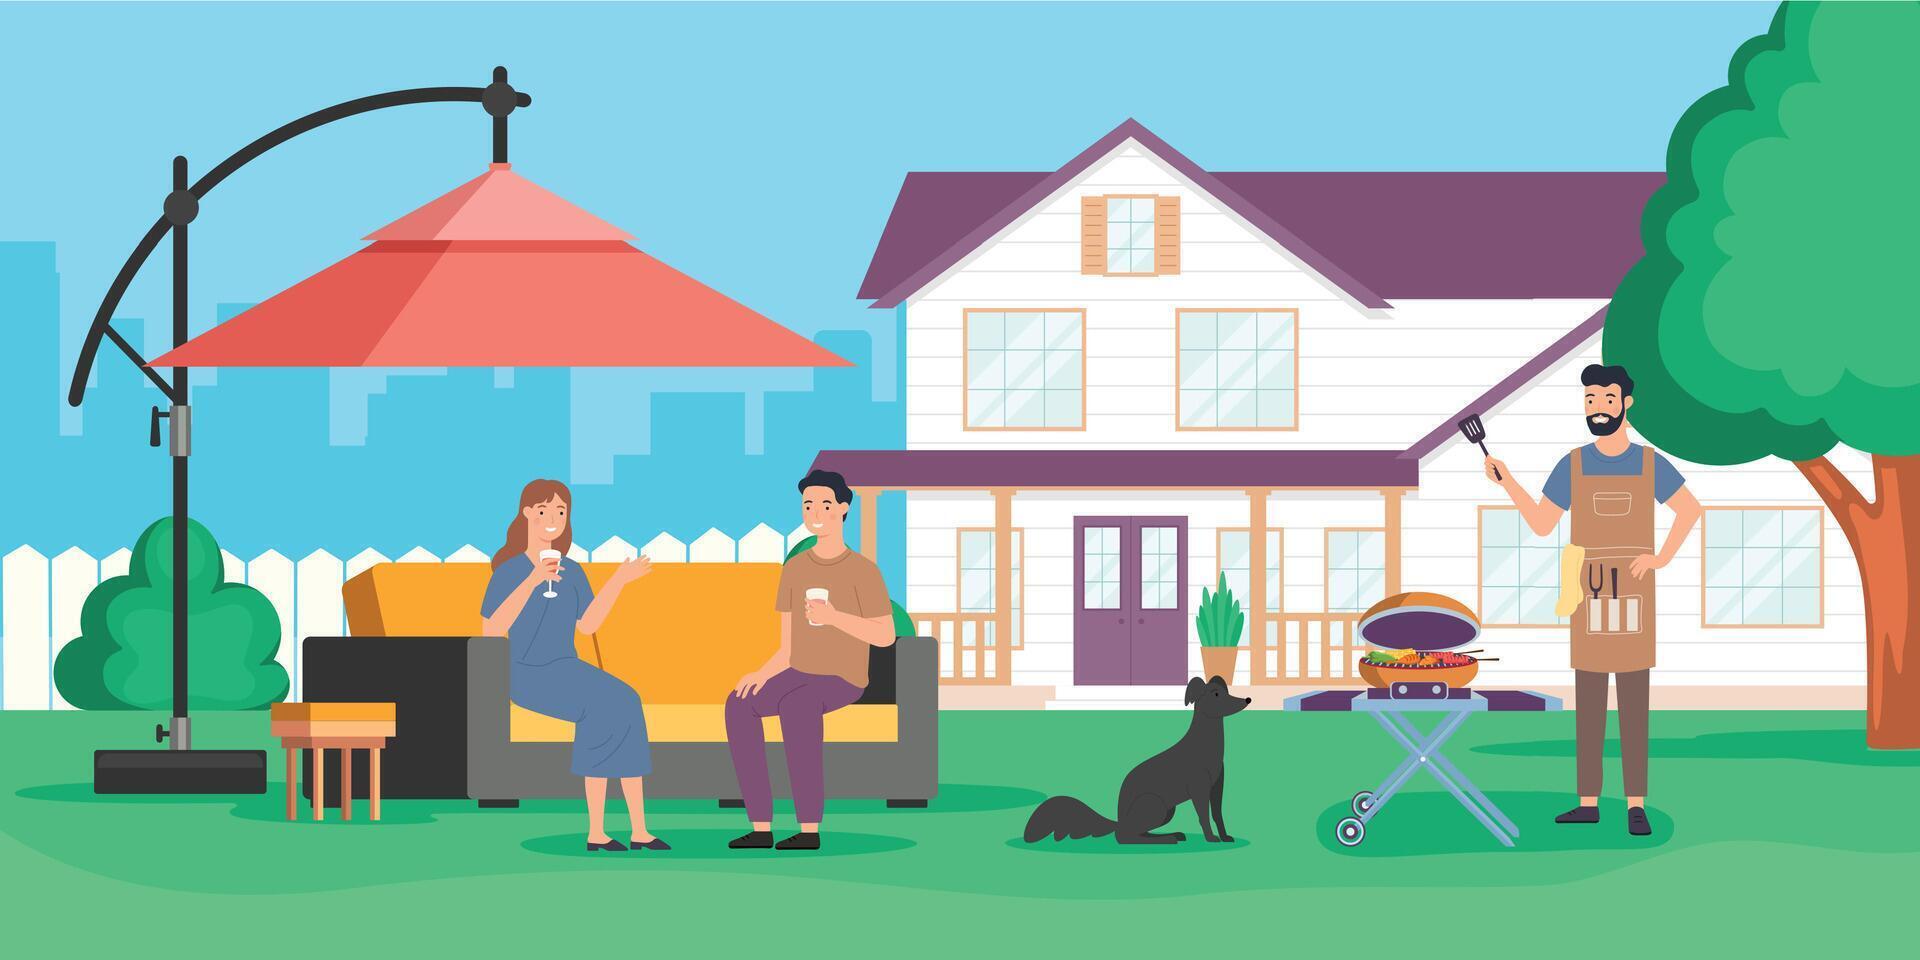 Family party with barbecue on backyard house vector